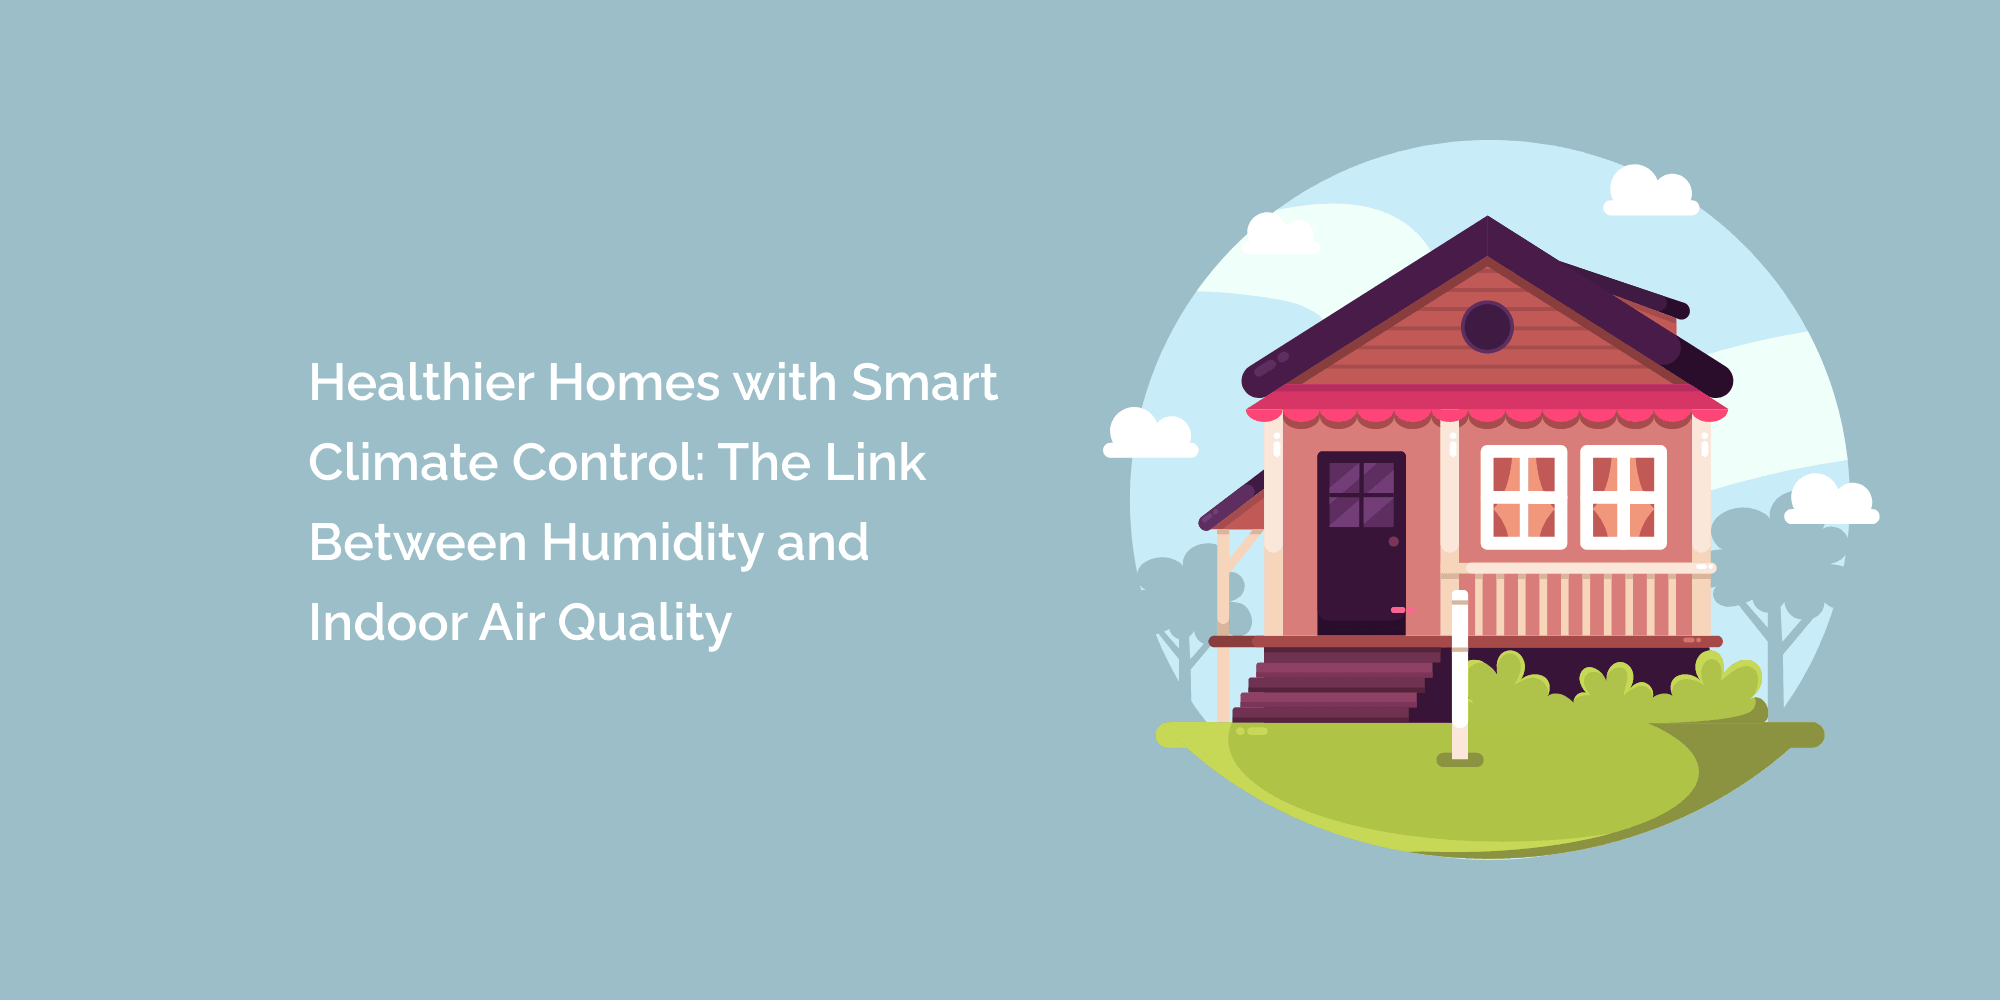 Healthier Homes with Smart Climate Control: The Link Between Humidity and Indoor Air Quality